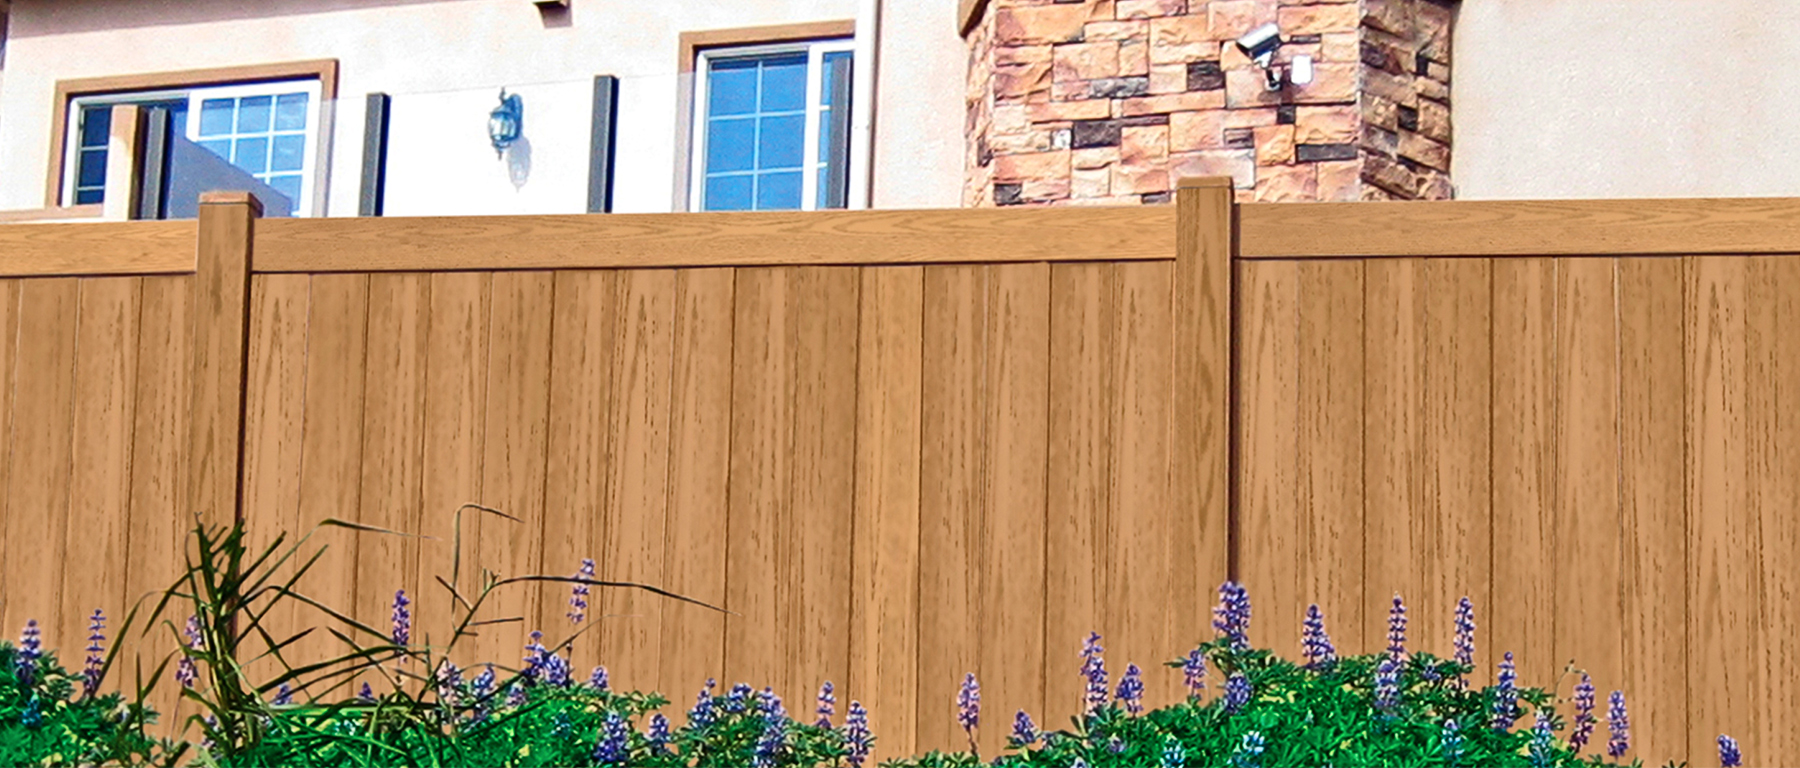 Duramax – Vinyl Fence, Storage Solutions, Patio Covers, Wall Panels, Decks  & More